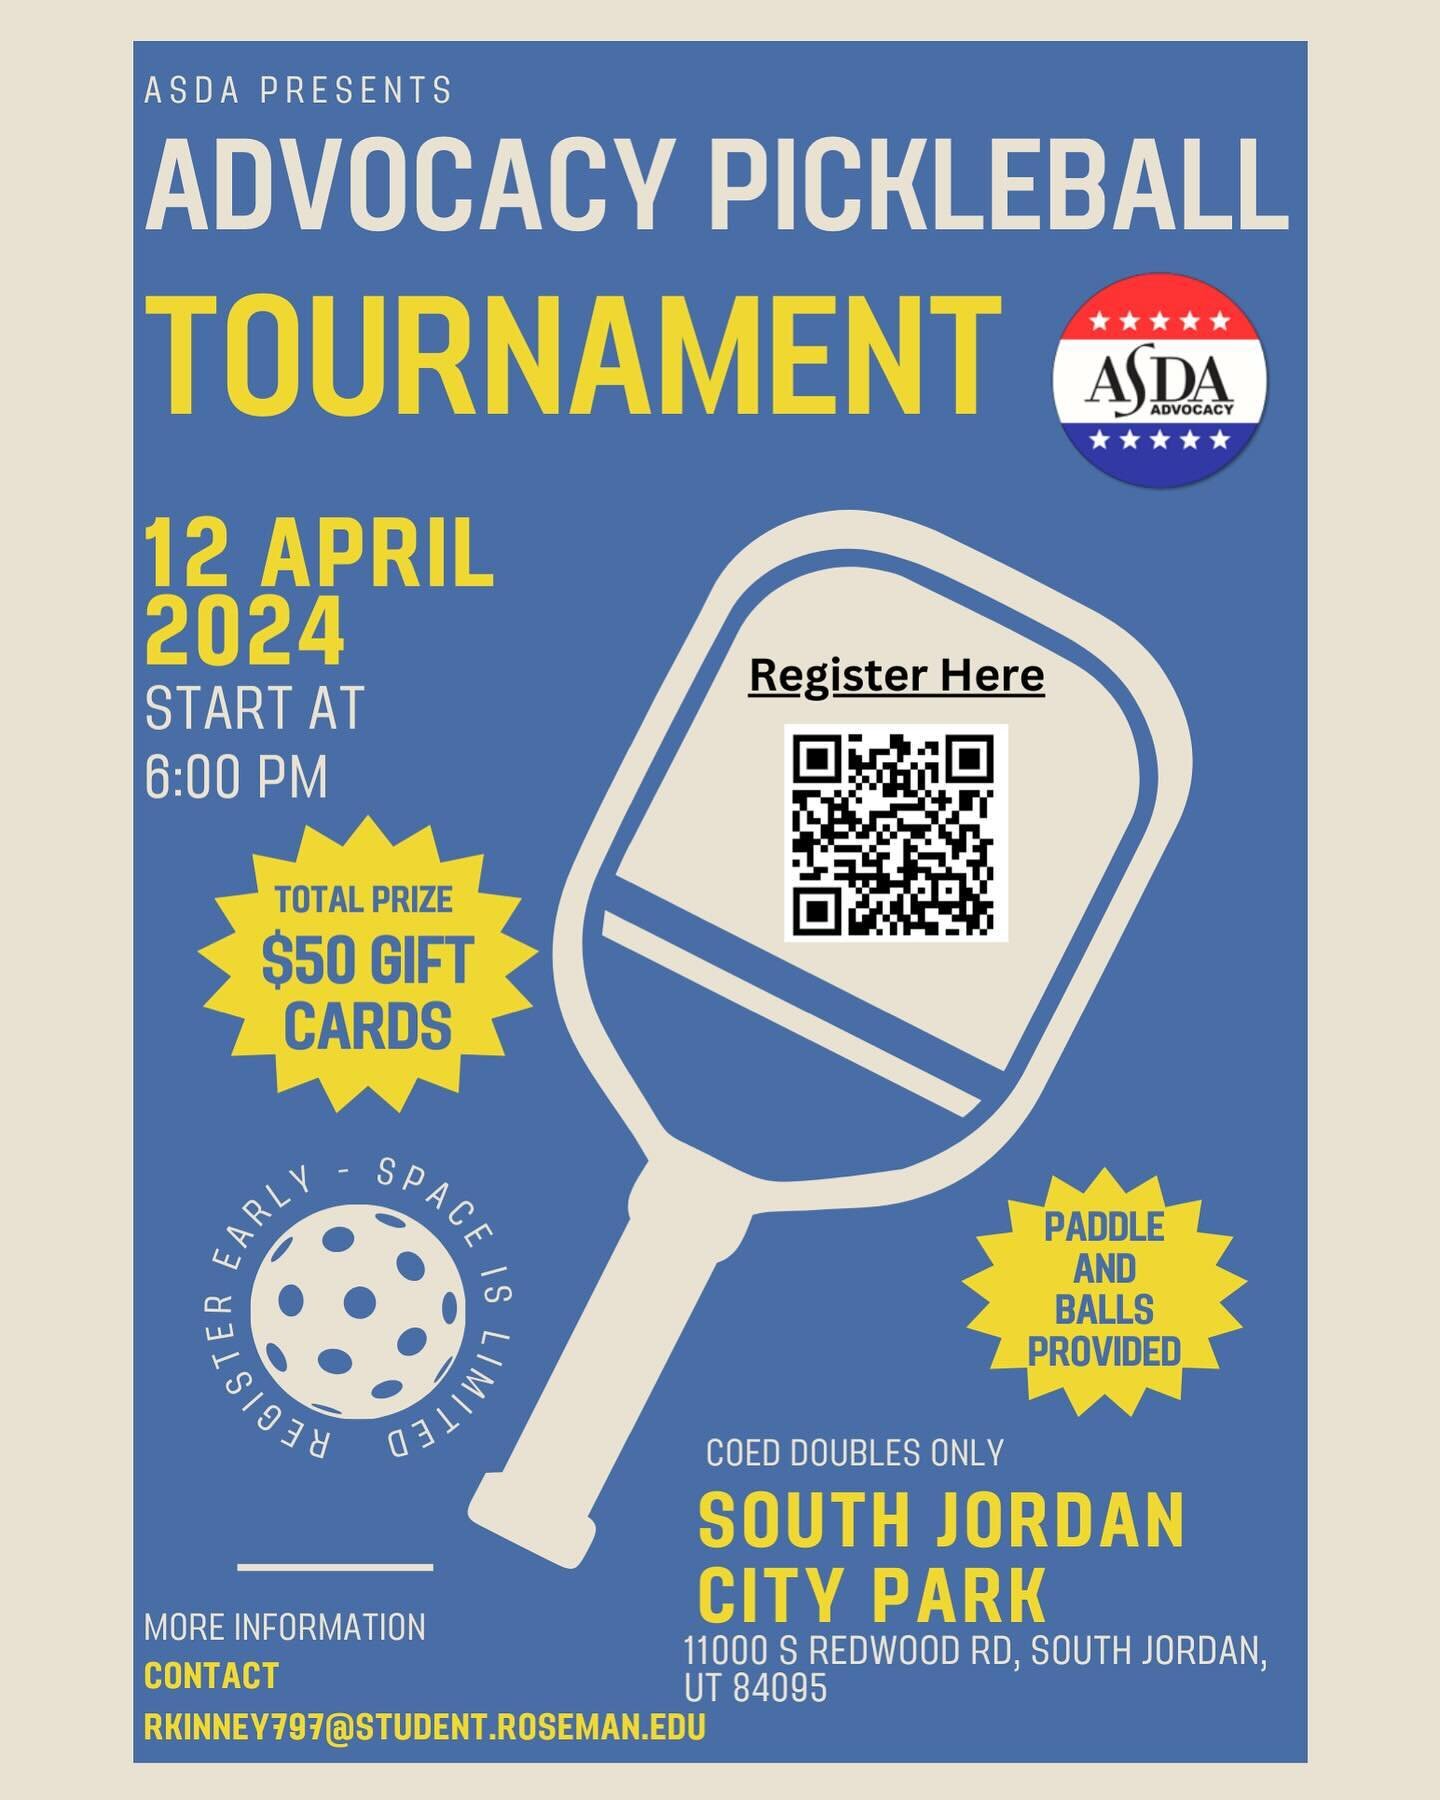 Looking for a challenge and an opportunity to win $50 gift cards? Come join the advocacy pickleball tournament! 🏓 

Register using the link in the bio! 

#dentalstudents #asda #dentists #futuredentists #roseman #utah #dentalschool #teeth #dentistry 